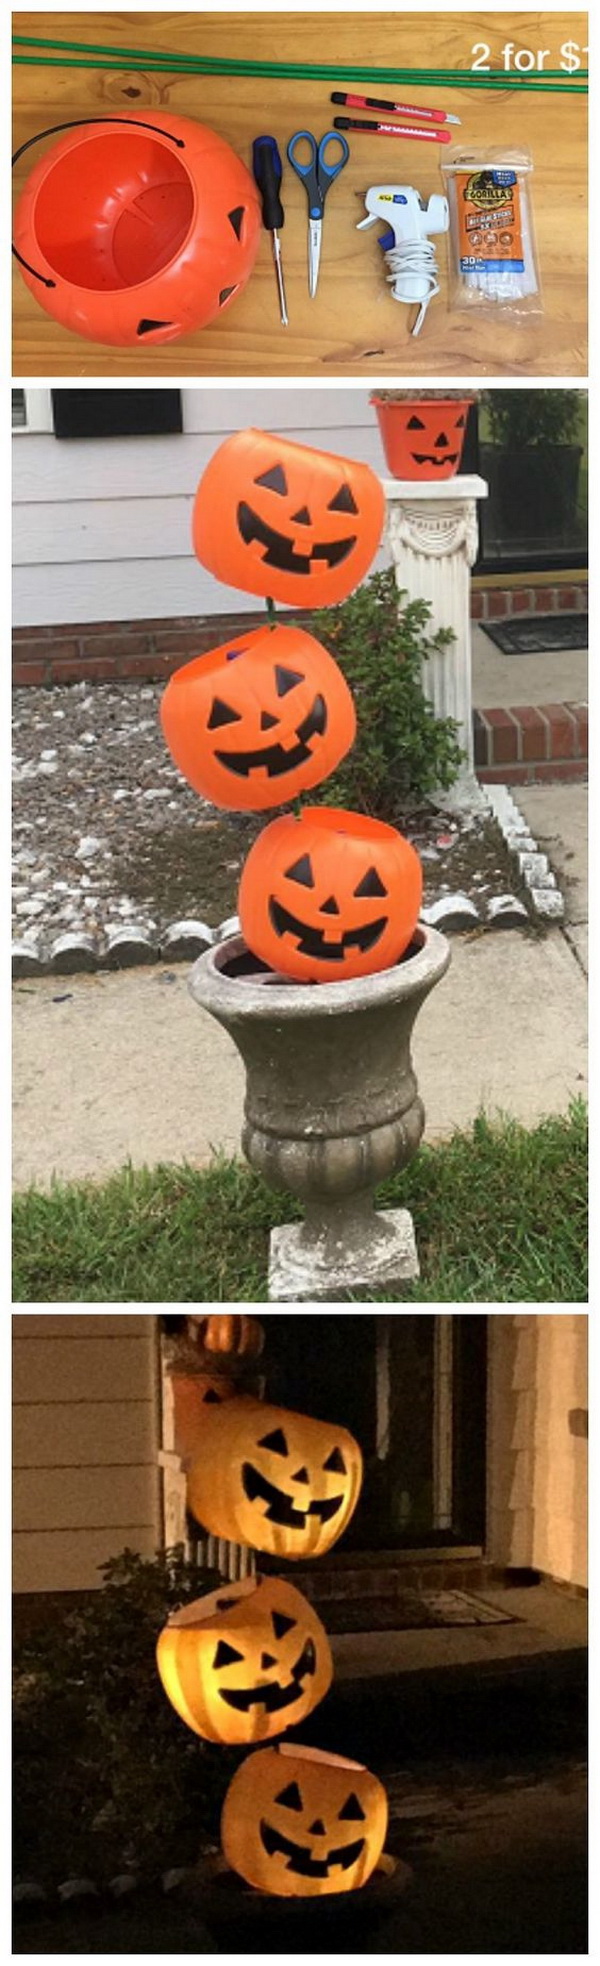 Tipsy Plastic Pumpkin Decoration. Another stunning DIY decoration idea for your front porch for this Halloween season!